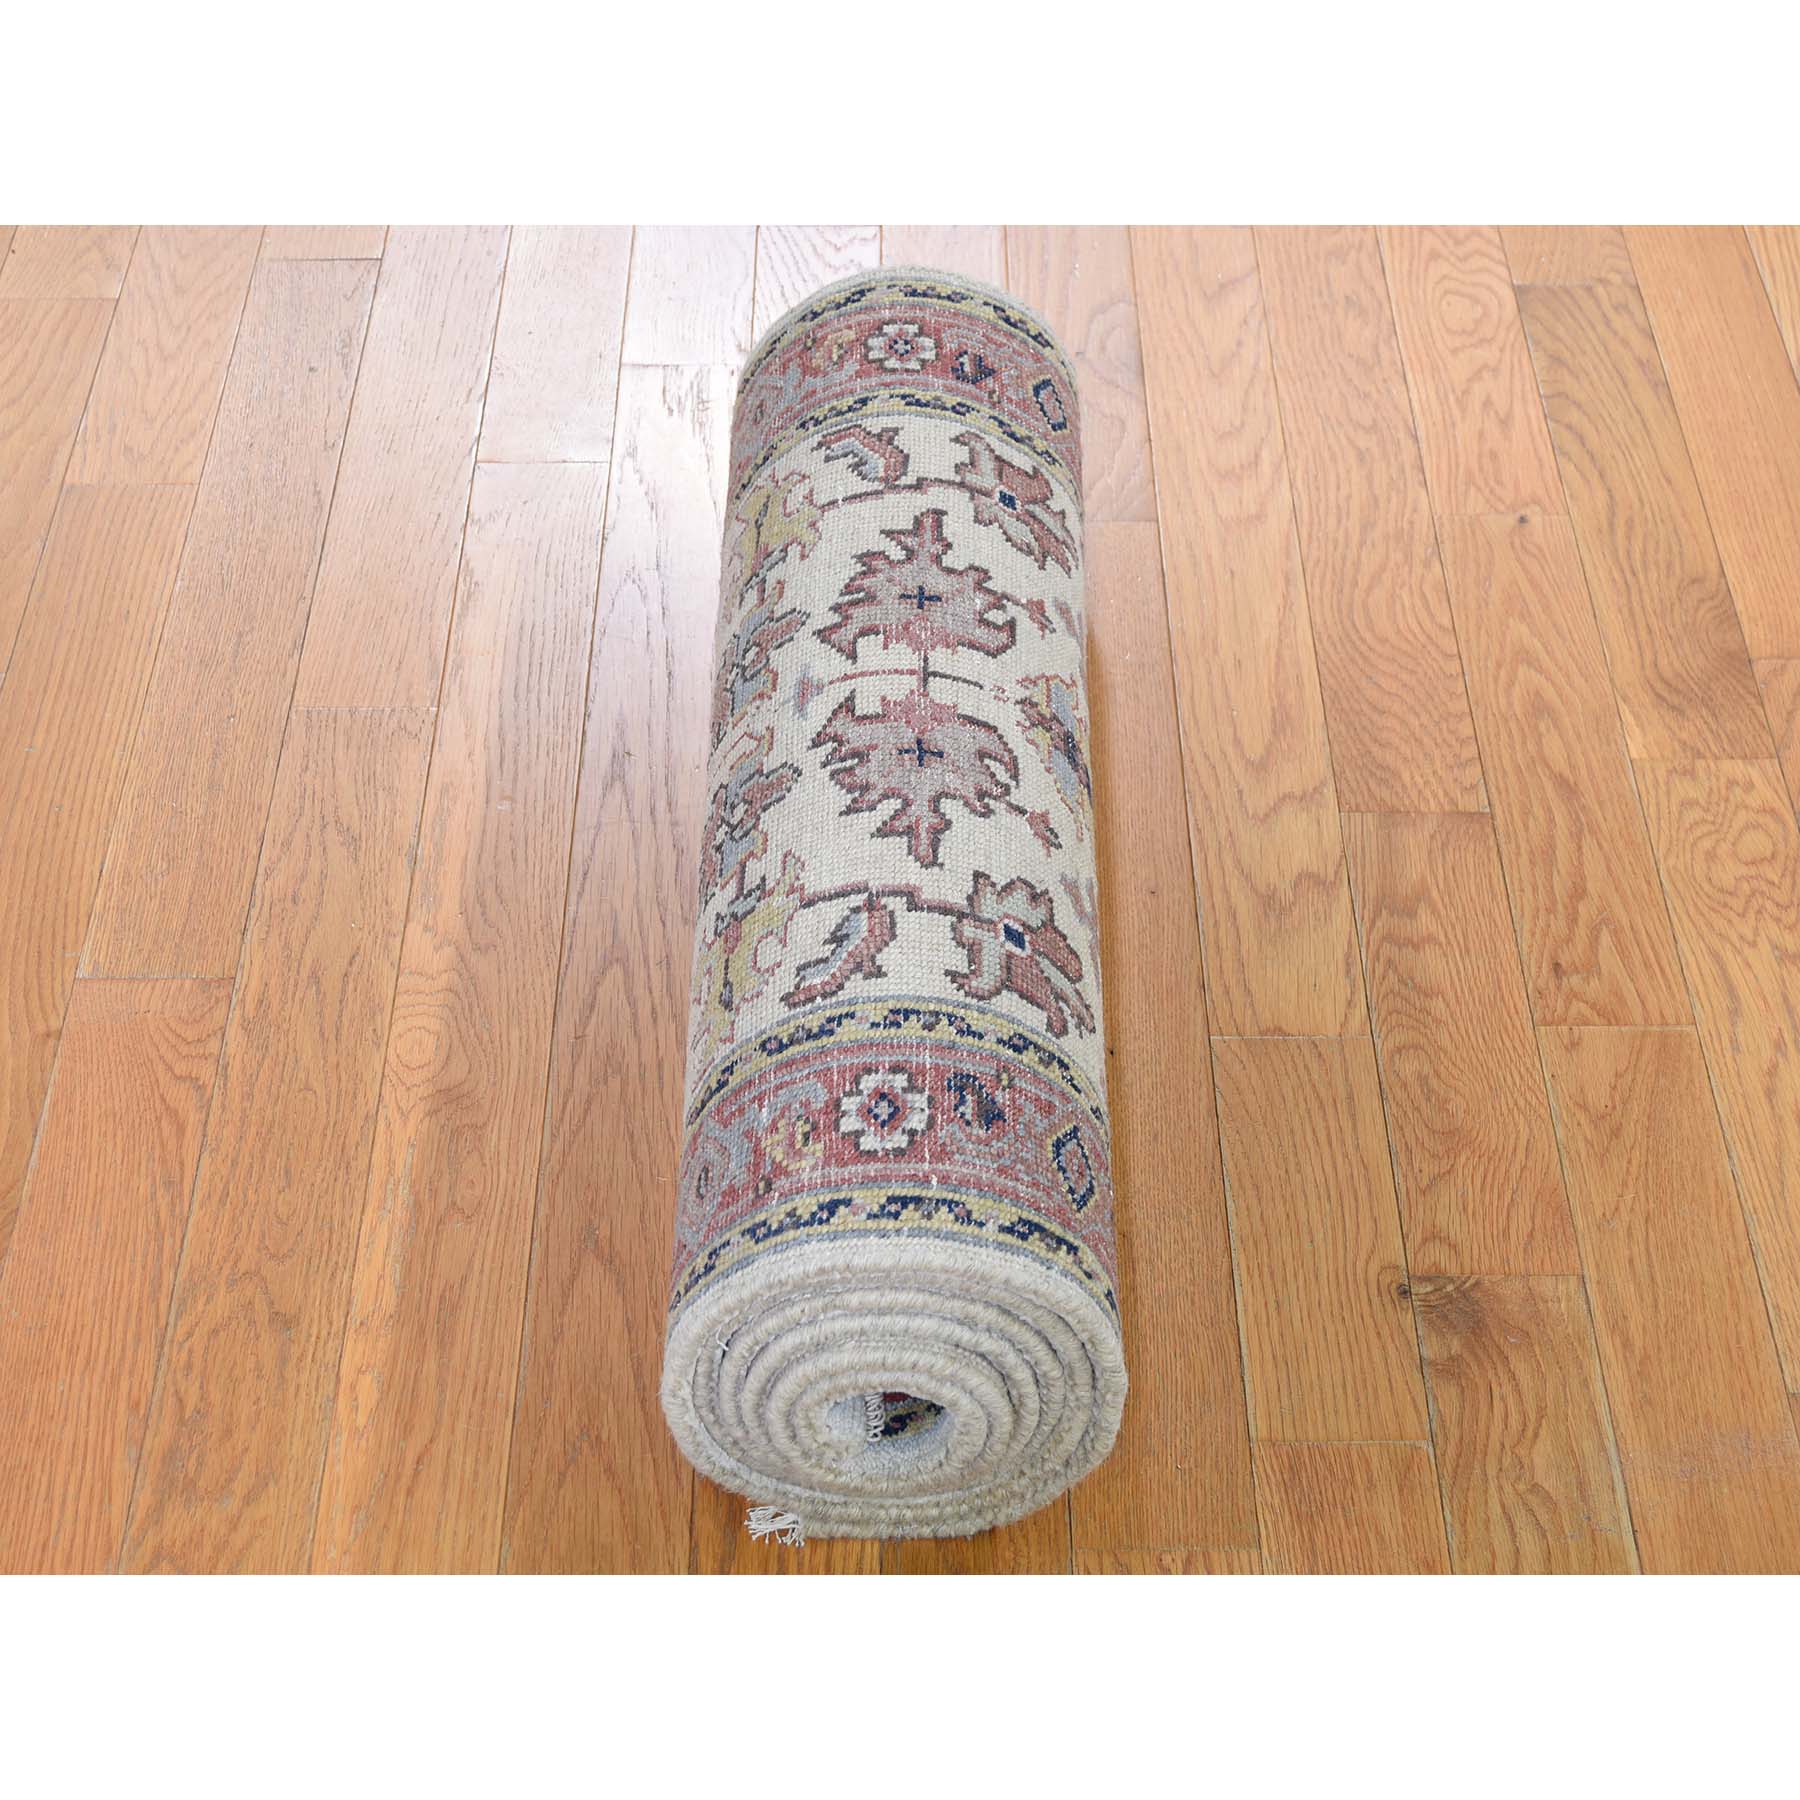 2-6 x7-9  Ivory Heriz Revival All Over Design Pure Wool Hand-Knotted Oriental Runner Rug 